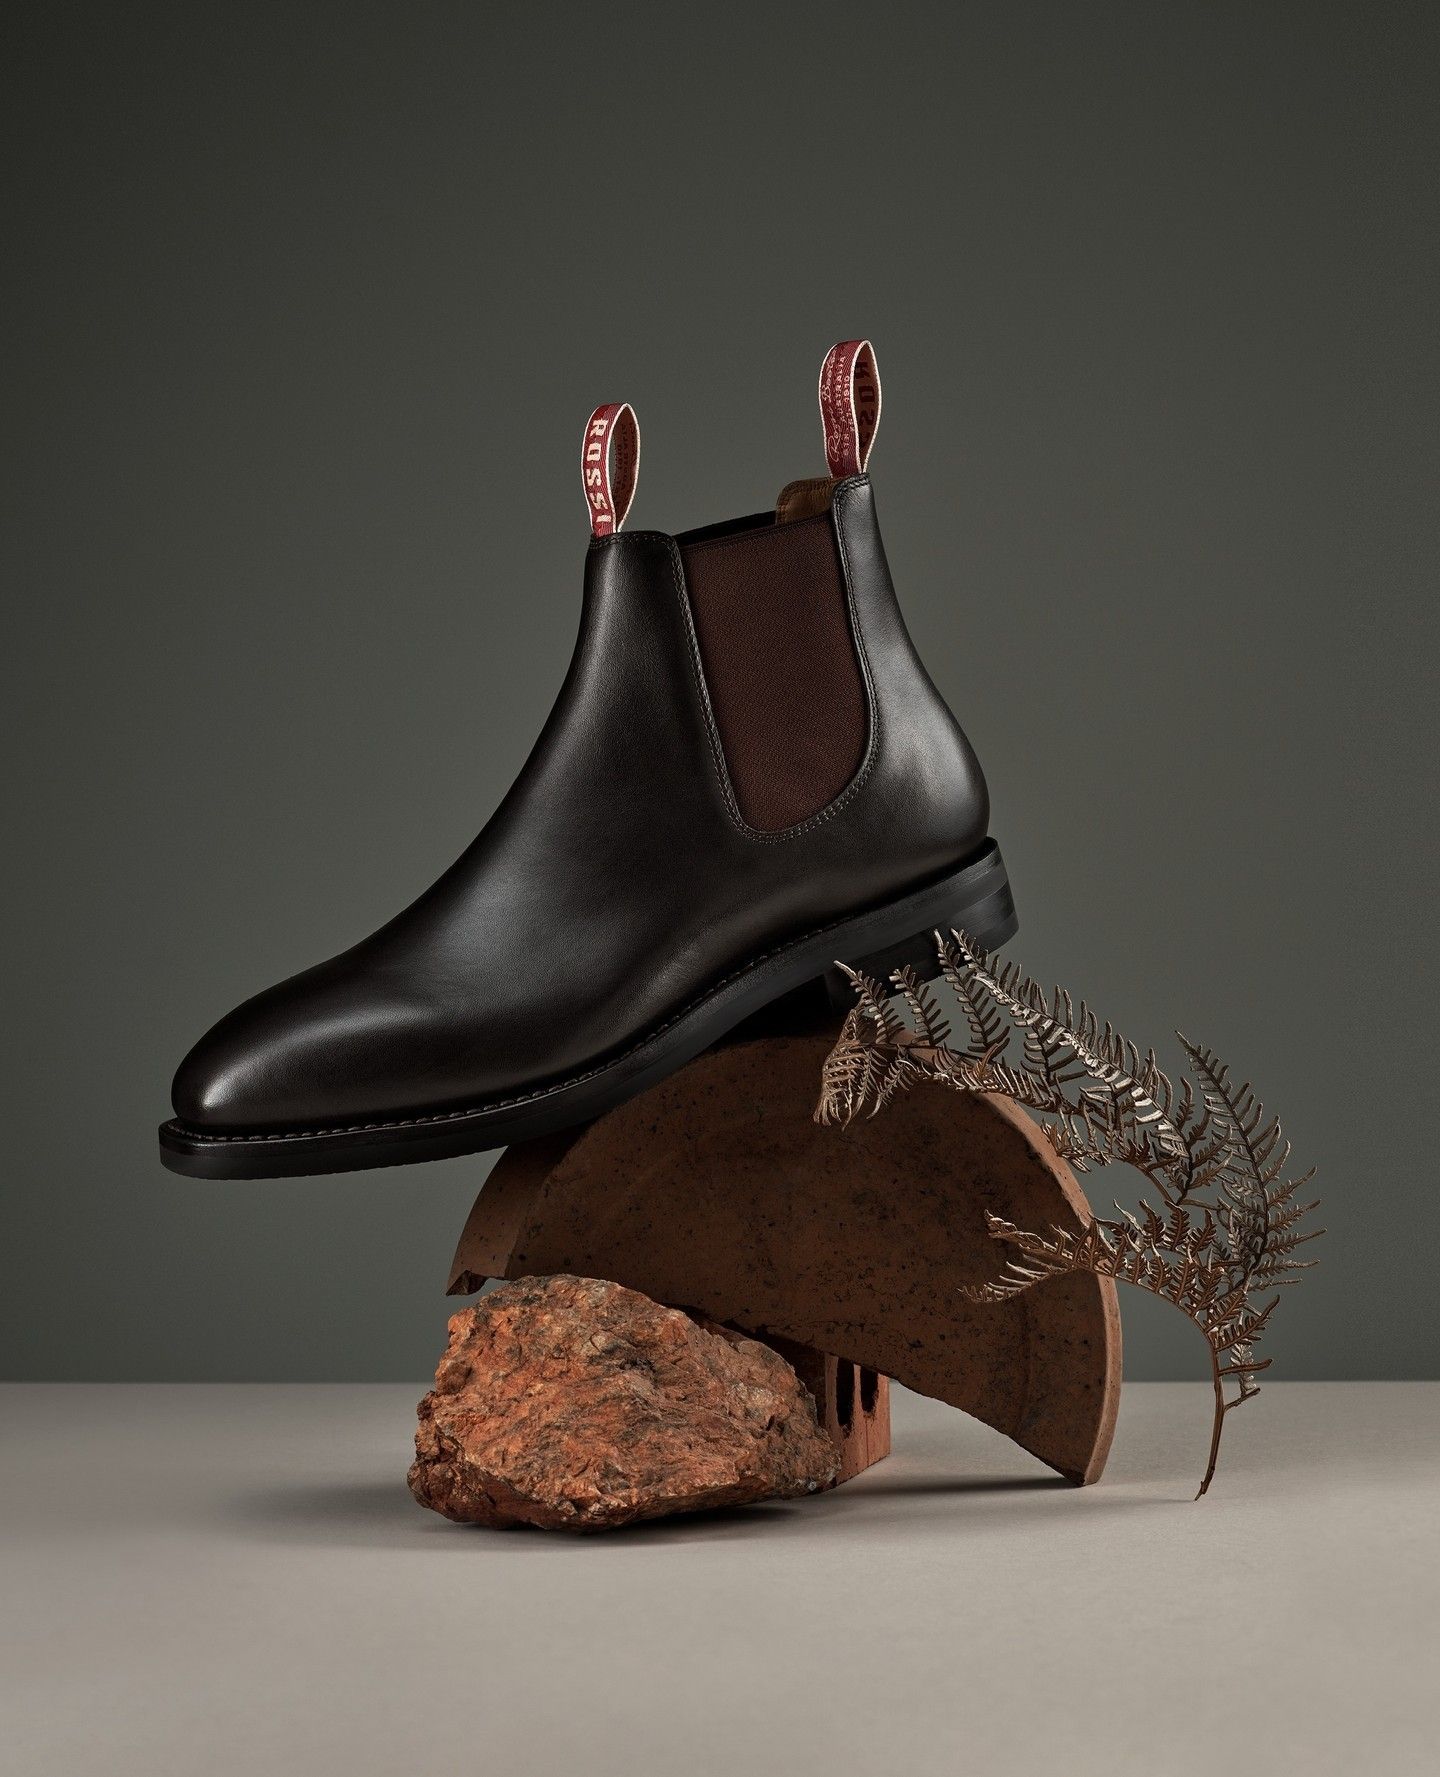 Introducing The Kidman. ⁠
⁠
We are proud to launch our newest Rossi ...
⁠
Our Kidman boot is crafted from a single piece of premium Australian yearling leather. Made by hand with over a century of history stitched into each pair, our Chelsea boot is designed with pride to create quality that lasts.⁠
⁠
Shop online now. ⁠
⁠
#RossiBoots